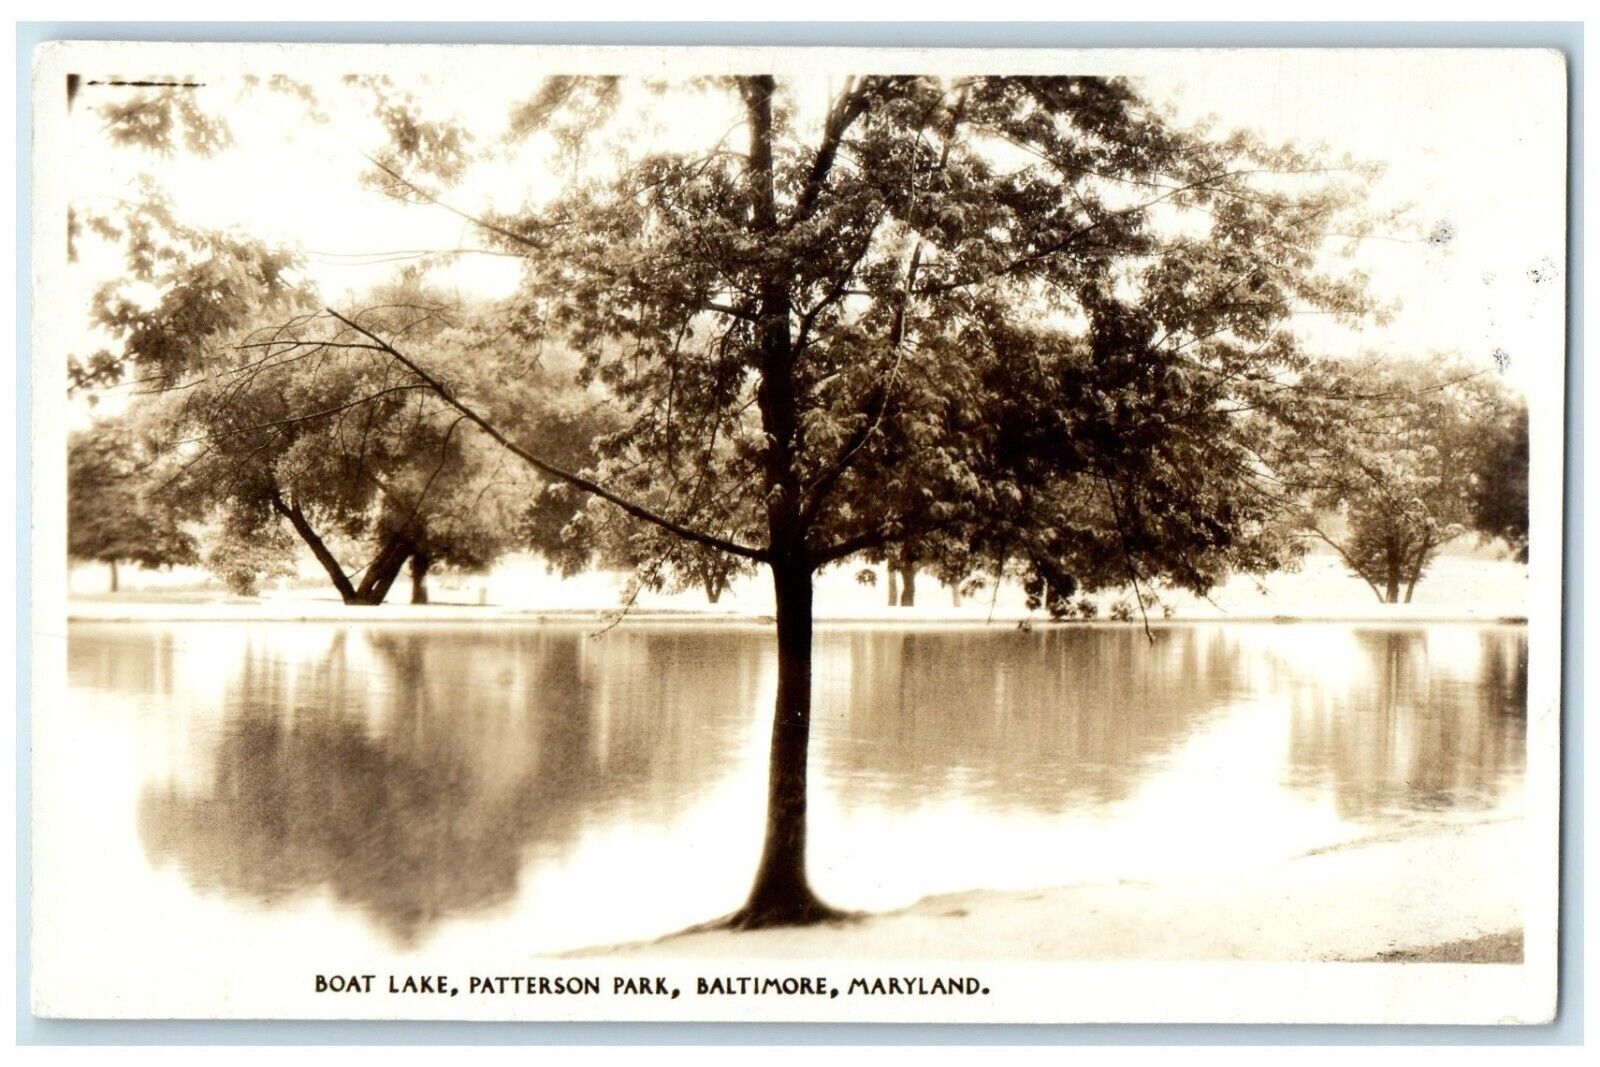 c1940's Boat Lake Patterson Park Baltimore Maryland MD RPPC Photo Postcard